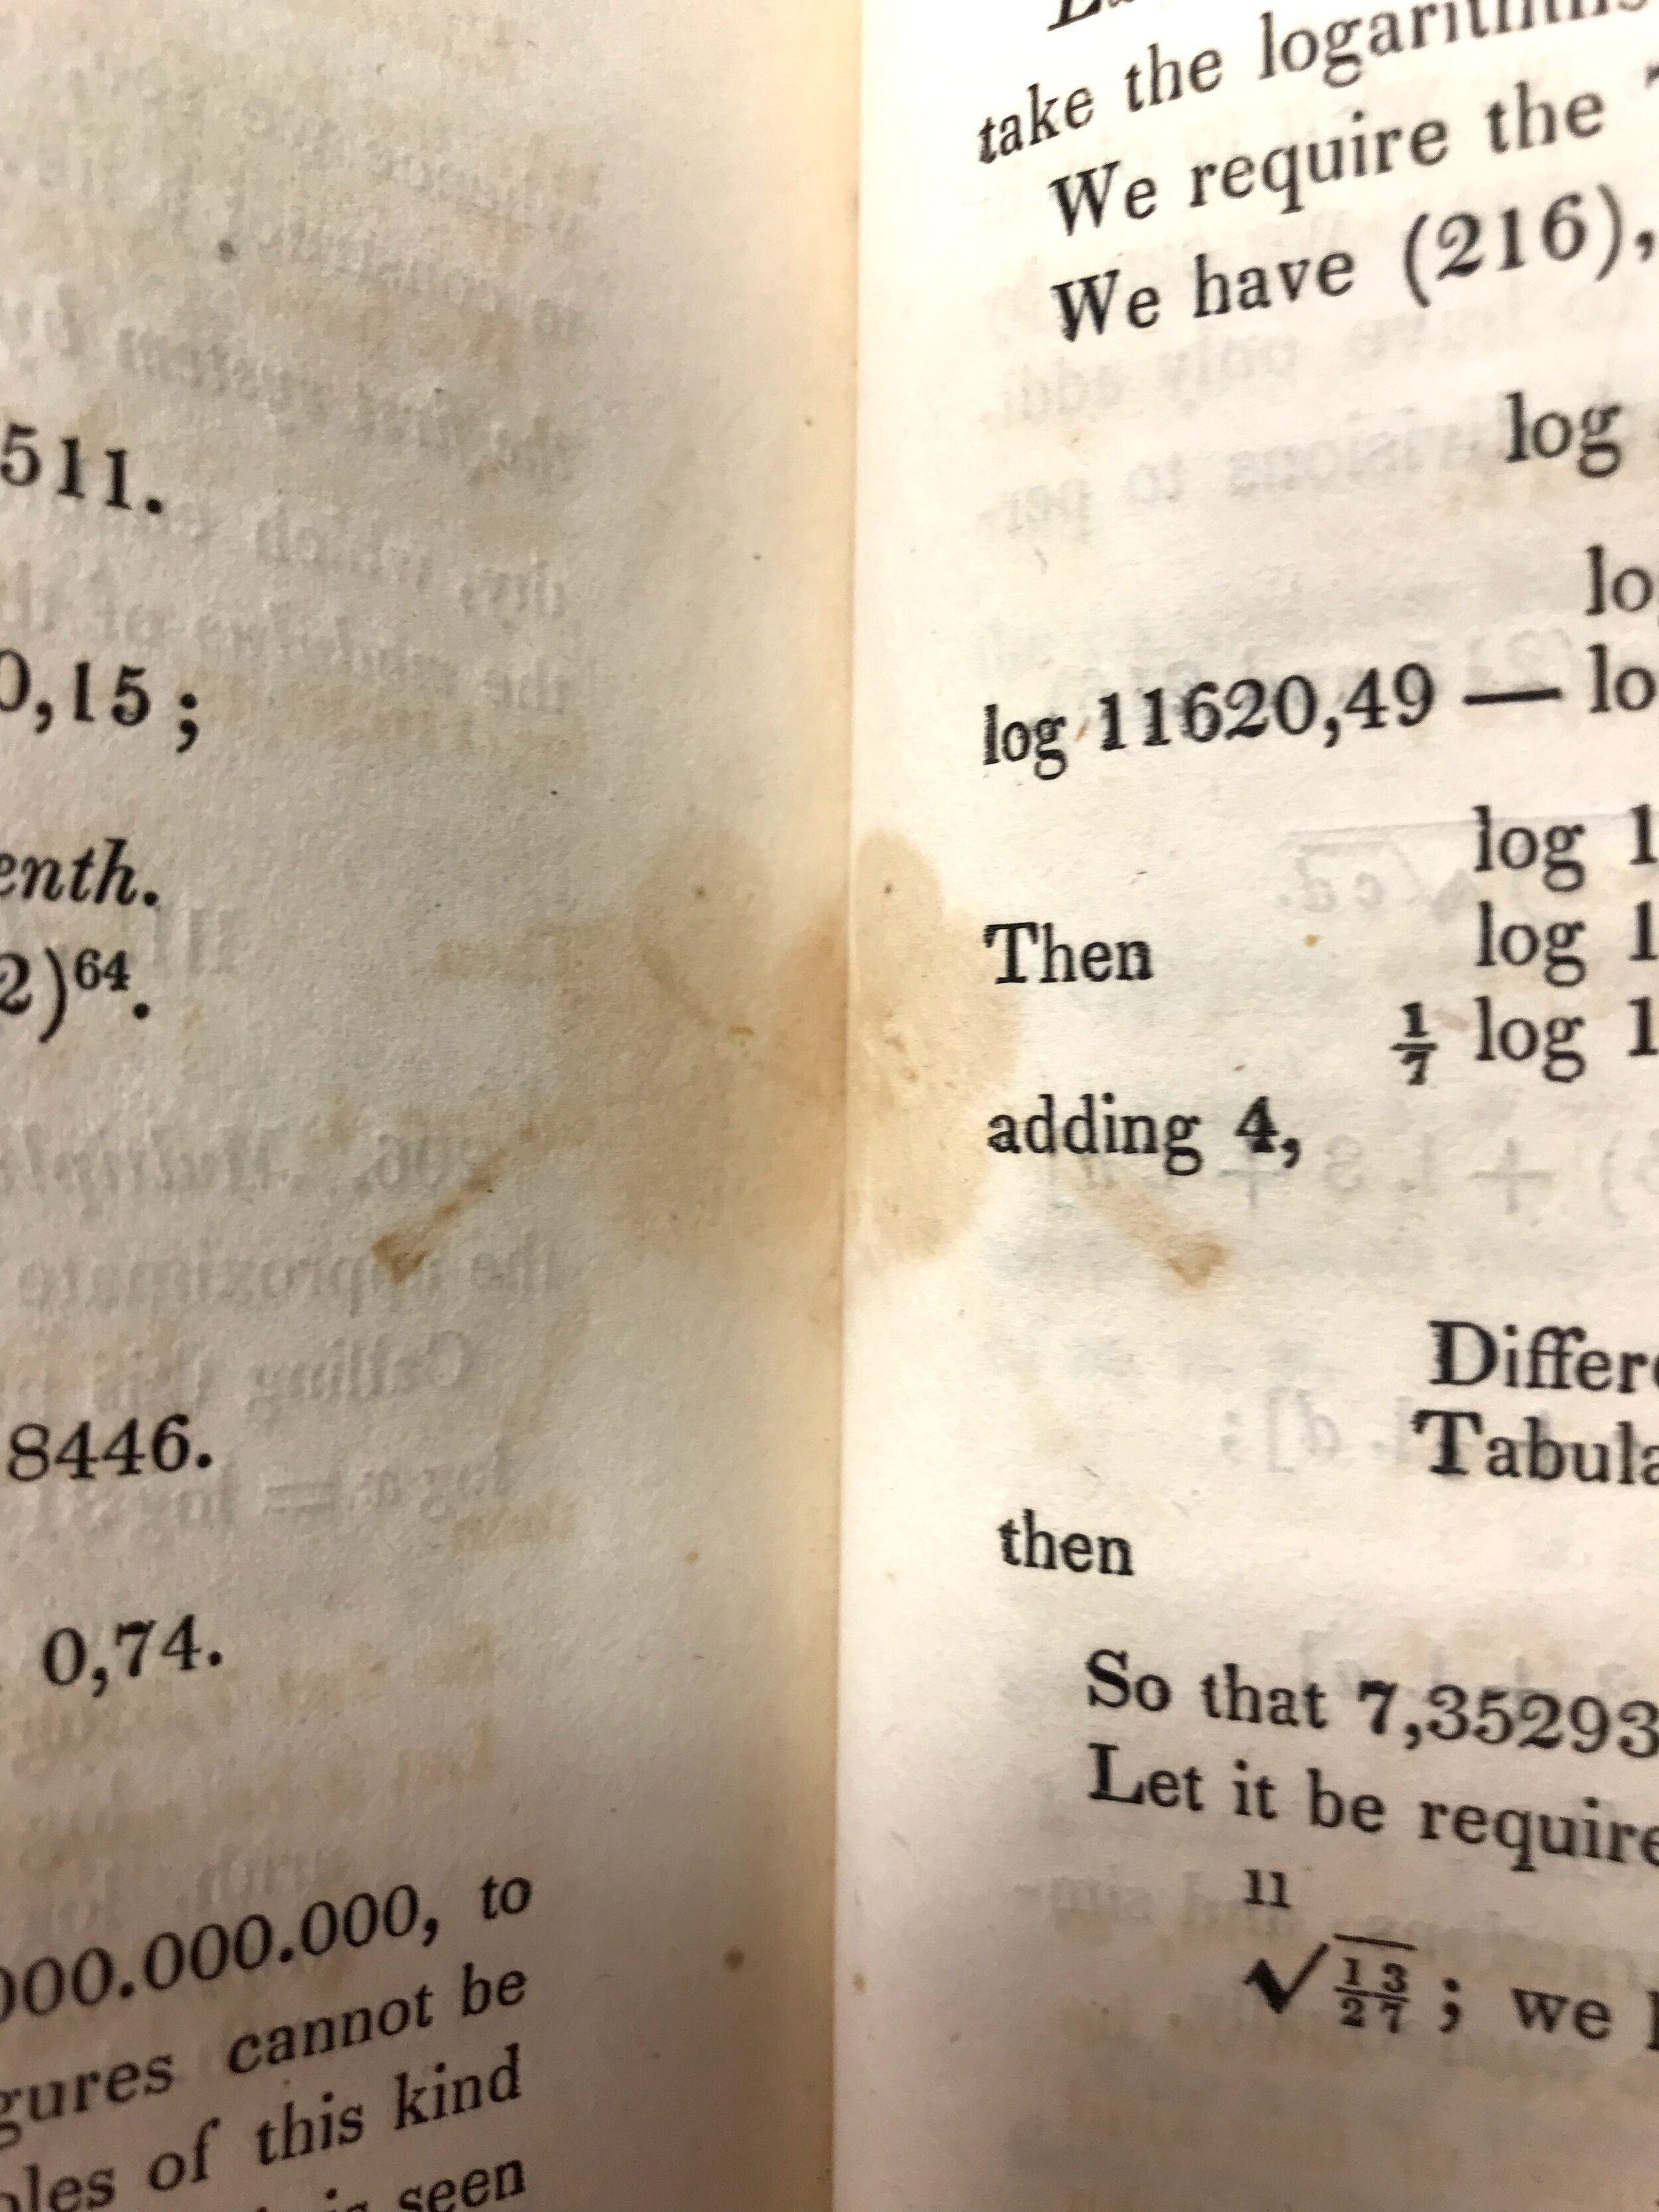  Must have been a particularly juicy specimen; the staining goes through multiple pages. 